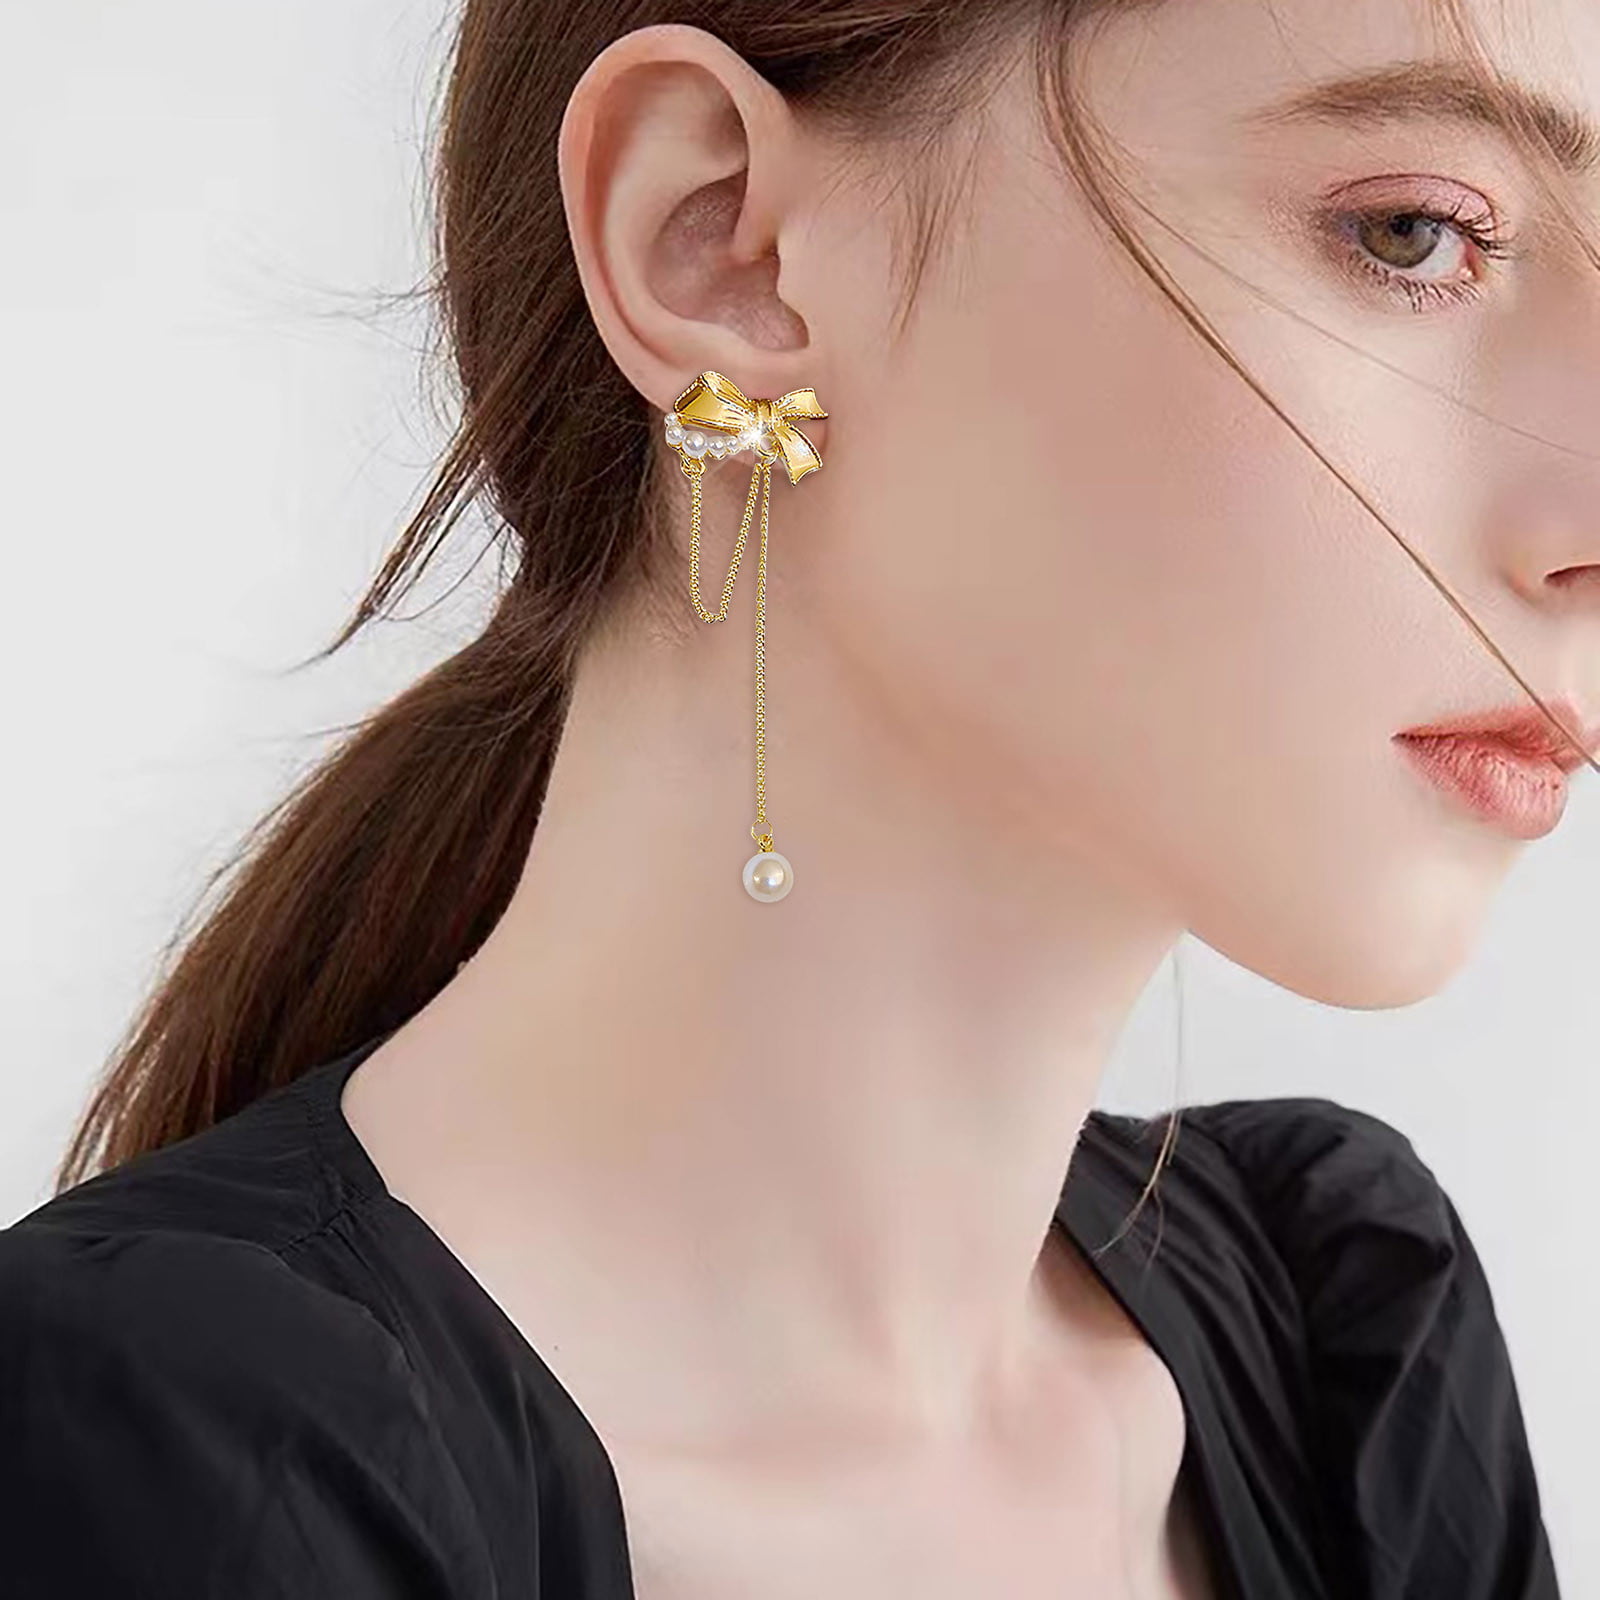 2019 Korean Minimalist Gold Color Twisted Alloy Ball Simulated Pearl Fish  Hook Earrings For Women Frech Romantic Drop Earrings From Jewelryset, $1.57